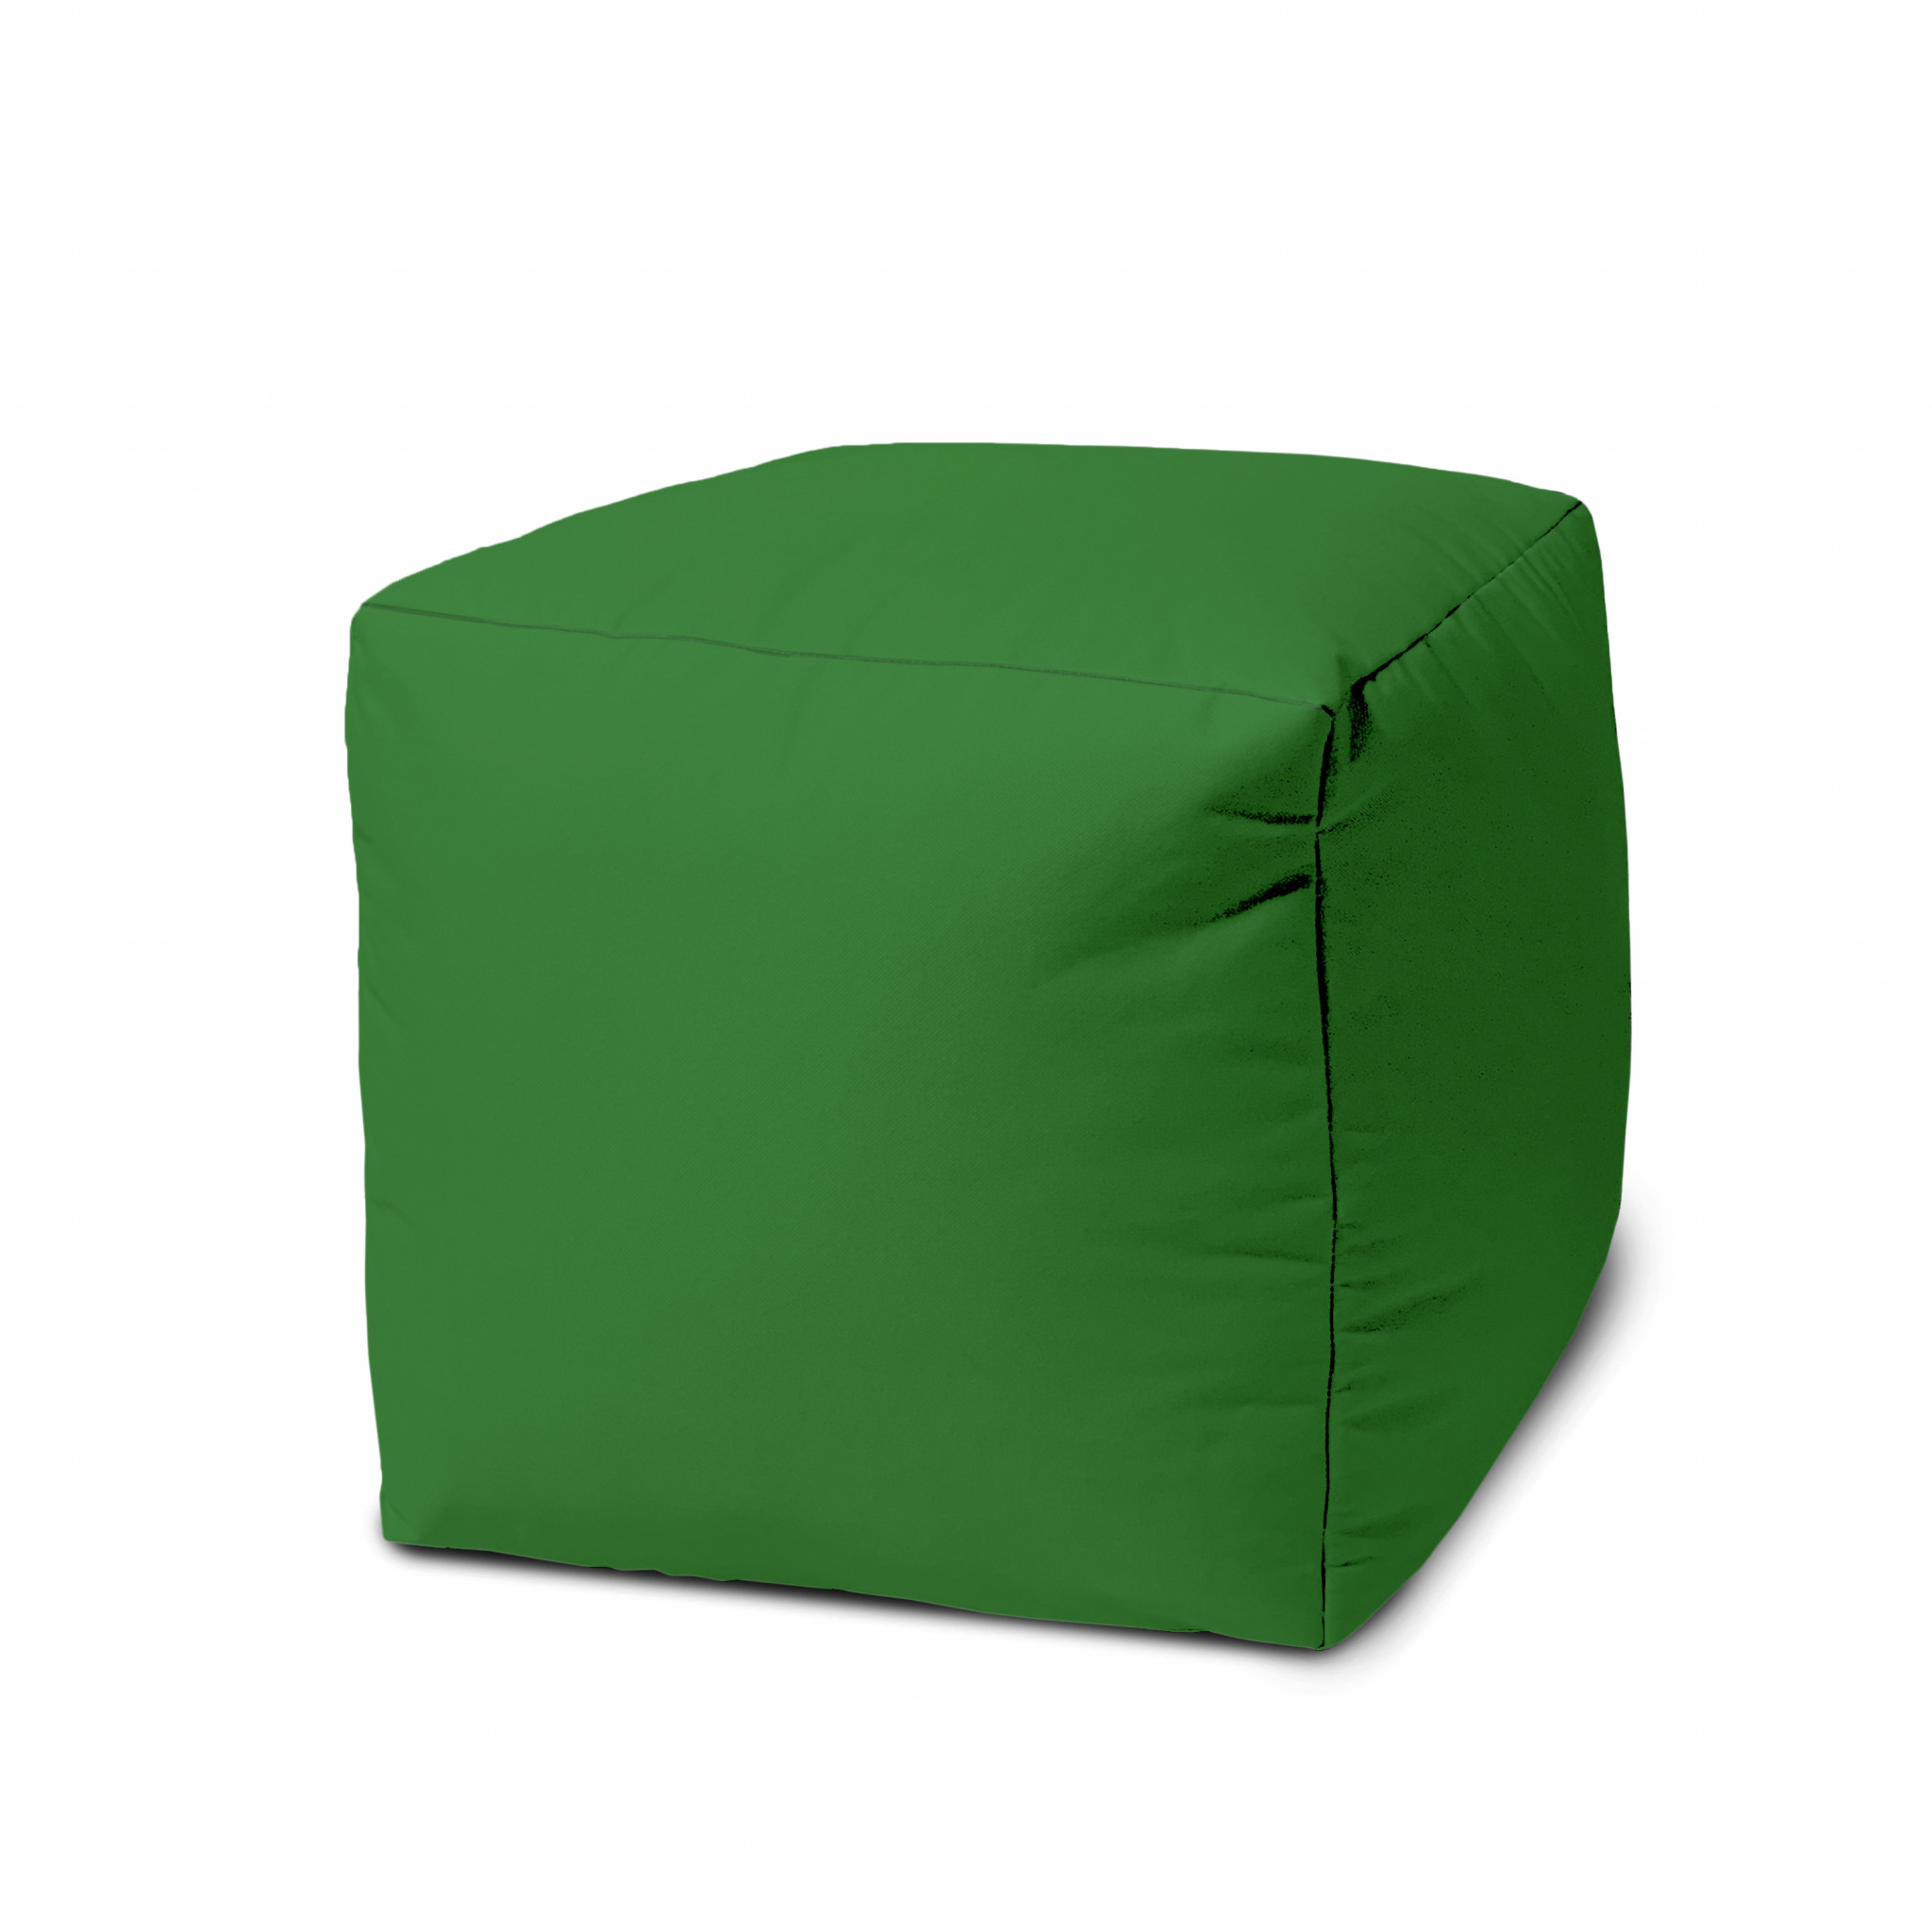 17 Cool Hunter Green Solid Color Indoor Outdoor Pouf Ottoman